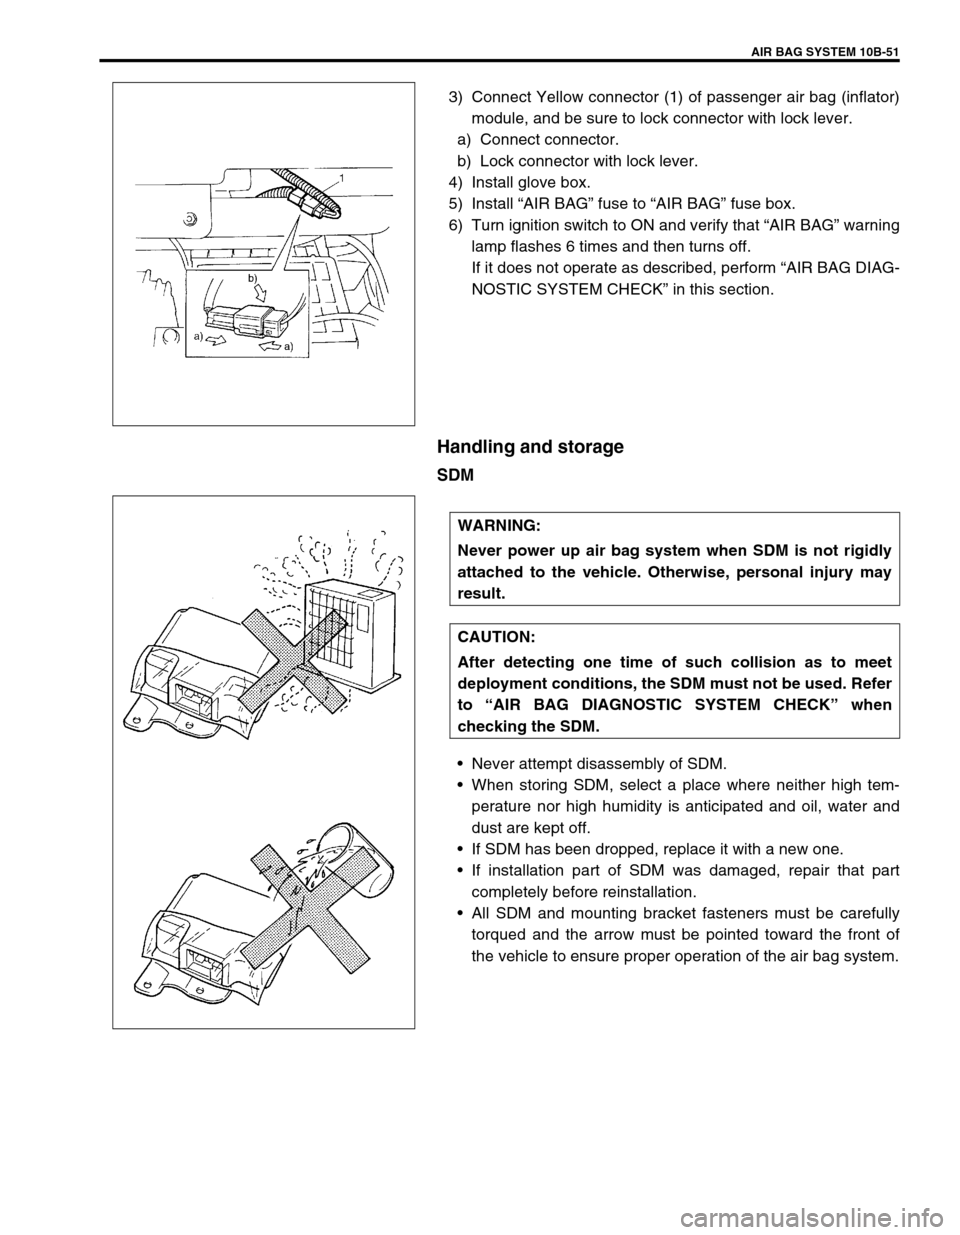 SUZUKI GRAND VITARA 2001 2.G Owners Manual AIR BAG SYSTEM 10B-51
3) Connect Yellow connector (1) of passenger air bag (inflator)
module, and be sure to lock connector with lock lever.
a) Connect connector.
b) Lock connector with lock lever.
4)